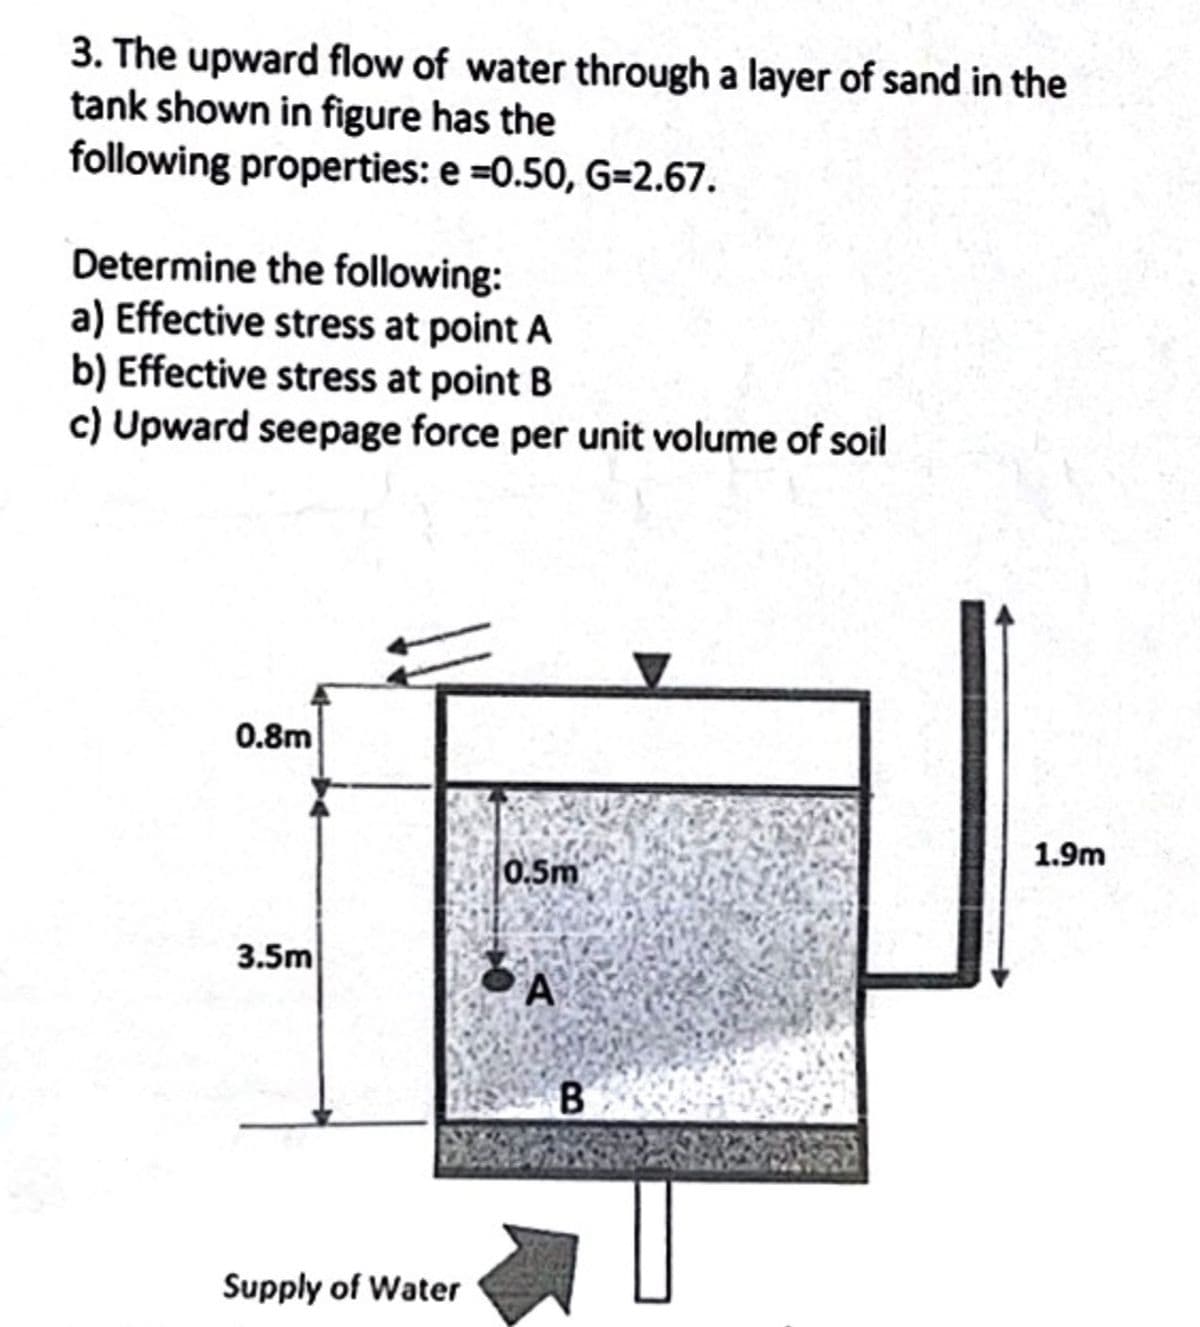 3. The upward flow of water through a layer of sand in the
tank shown in figure has the
following properties: e =0.50, G-2.67.
Determine the following:
a) Effective stress at point A
b) Effective stress at point B
c) Upward seepage force per unit volume of soil
0.8m
3.5m
Supply of Water
0.5m
A
B
1.9m